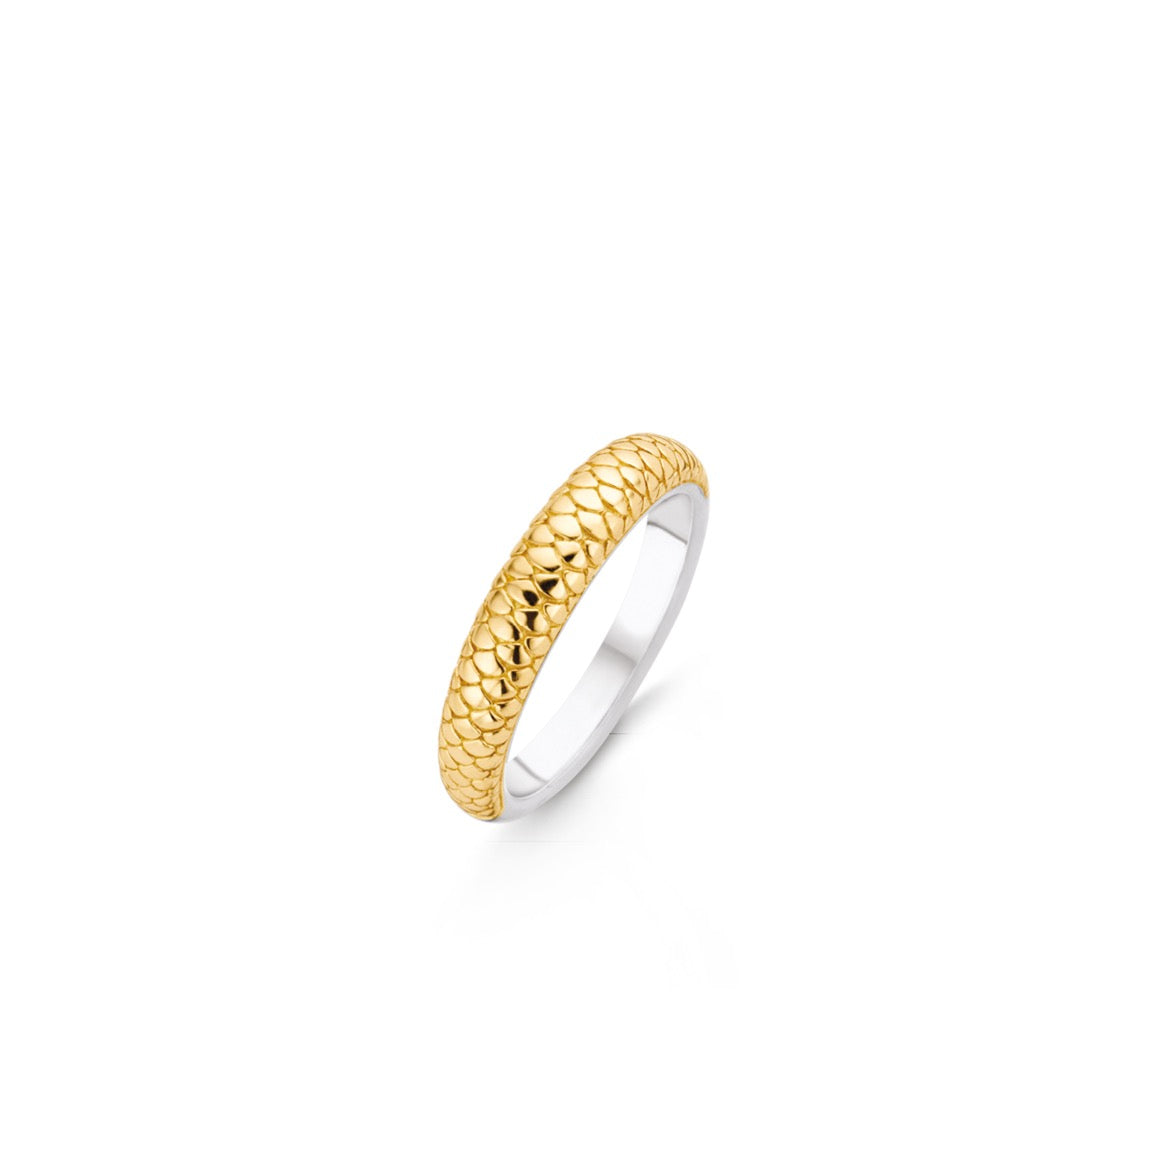 Shop Ti Sento: Braided Pave Gold Silver Wide Band Milano Ring